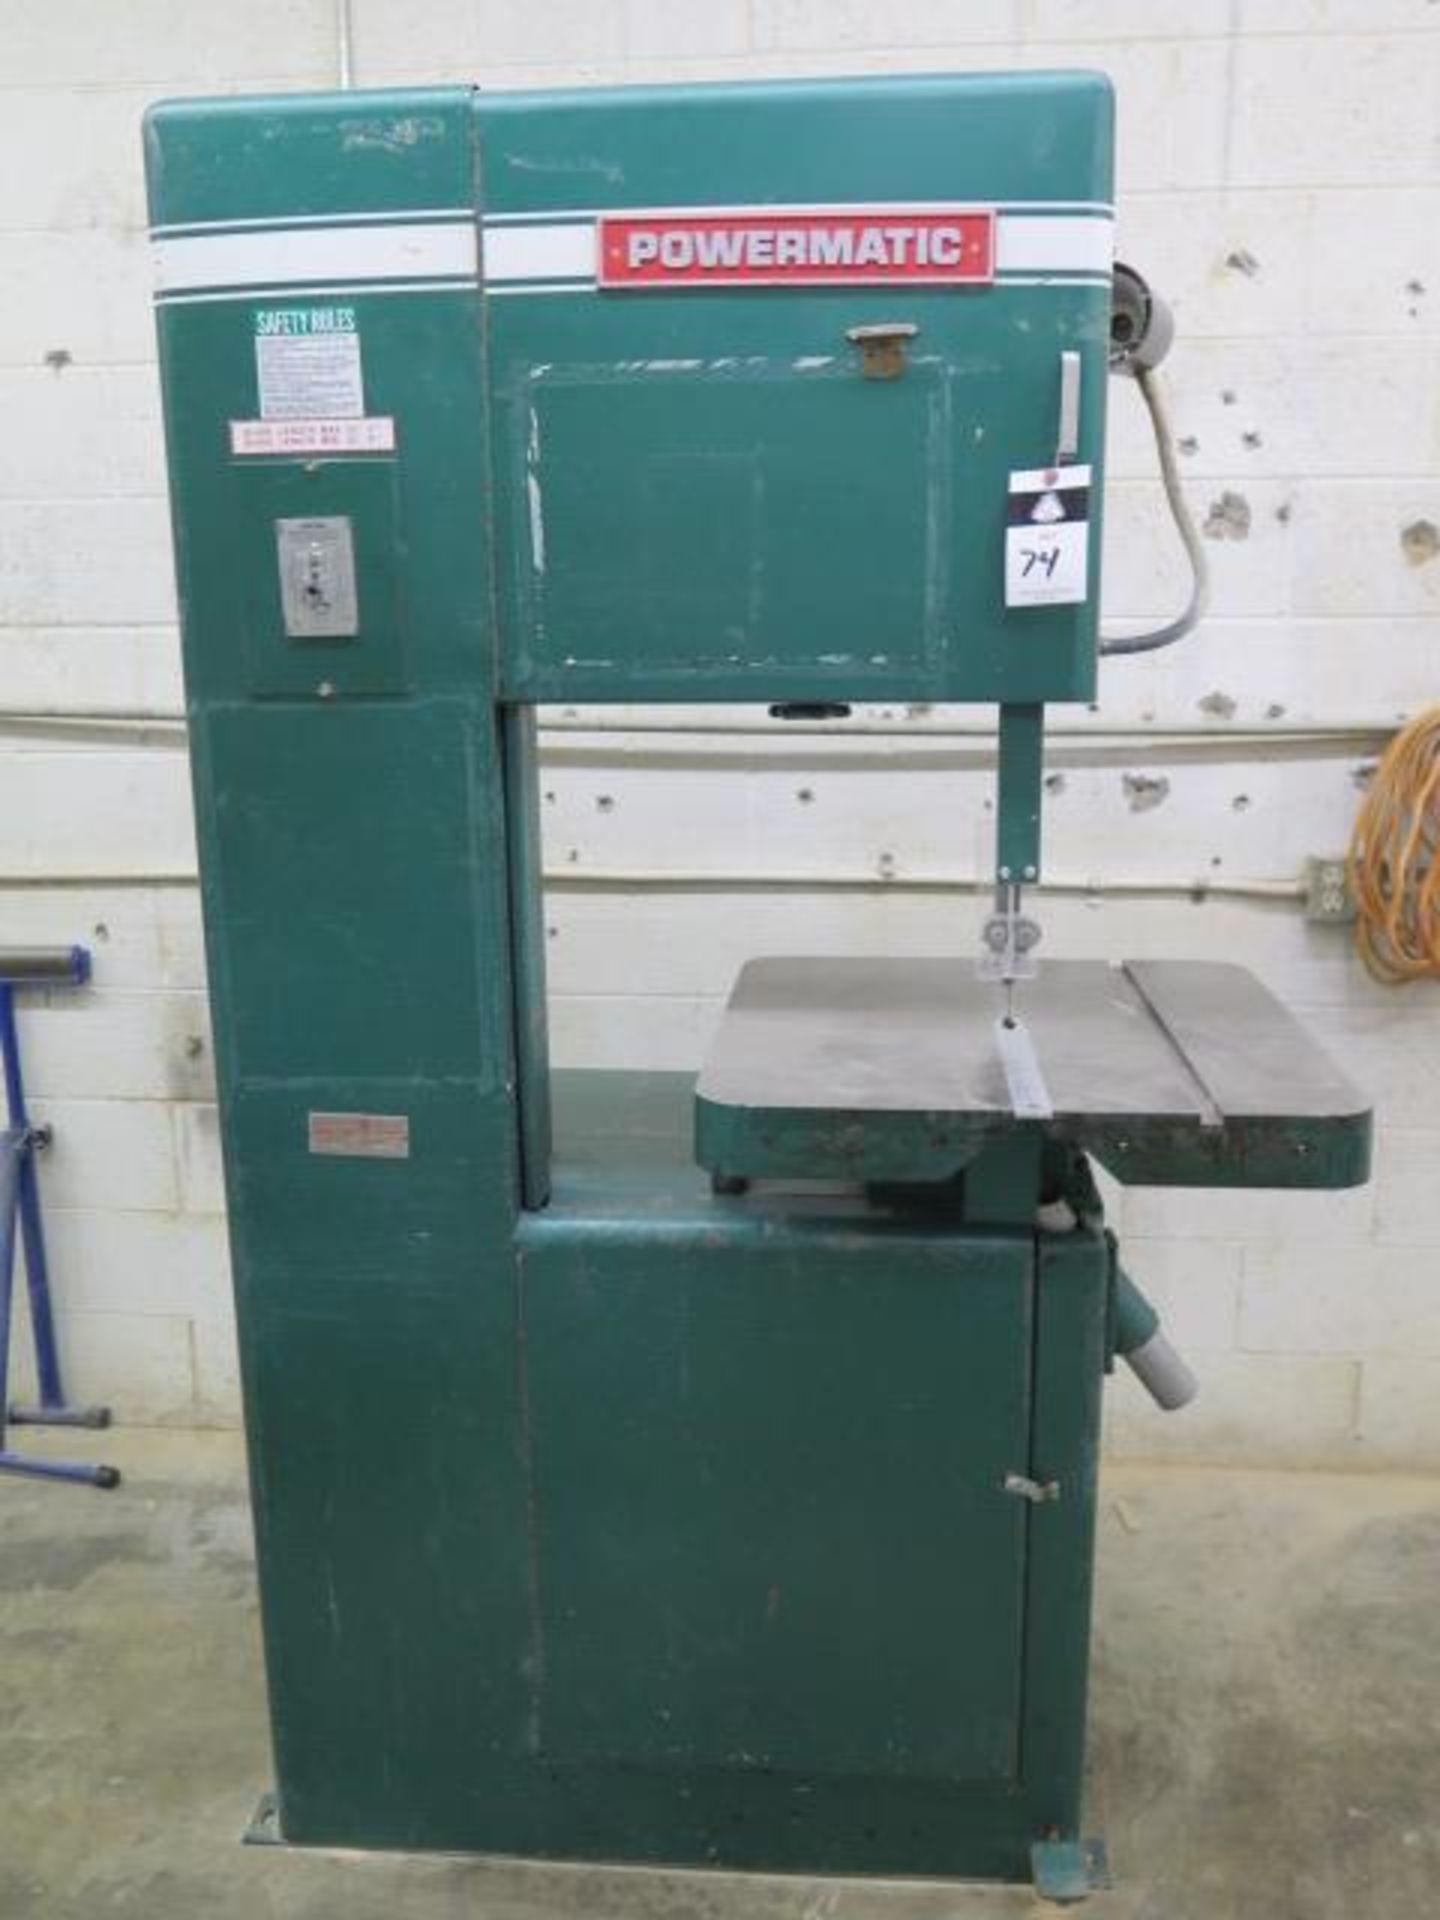 Powermatic mdl. 81 20” Vertical Band Saw s/n 8181191 w/ 24” x 24” Miter Table (SOLD AS-IS - NO